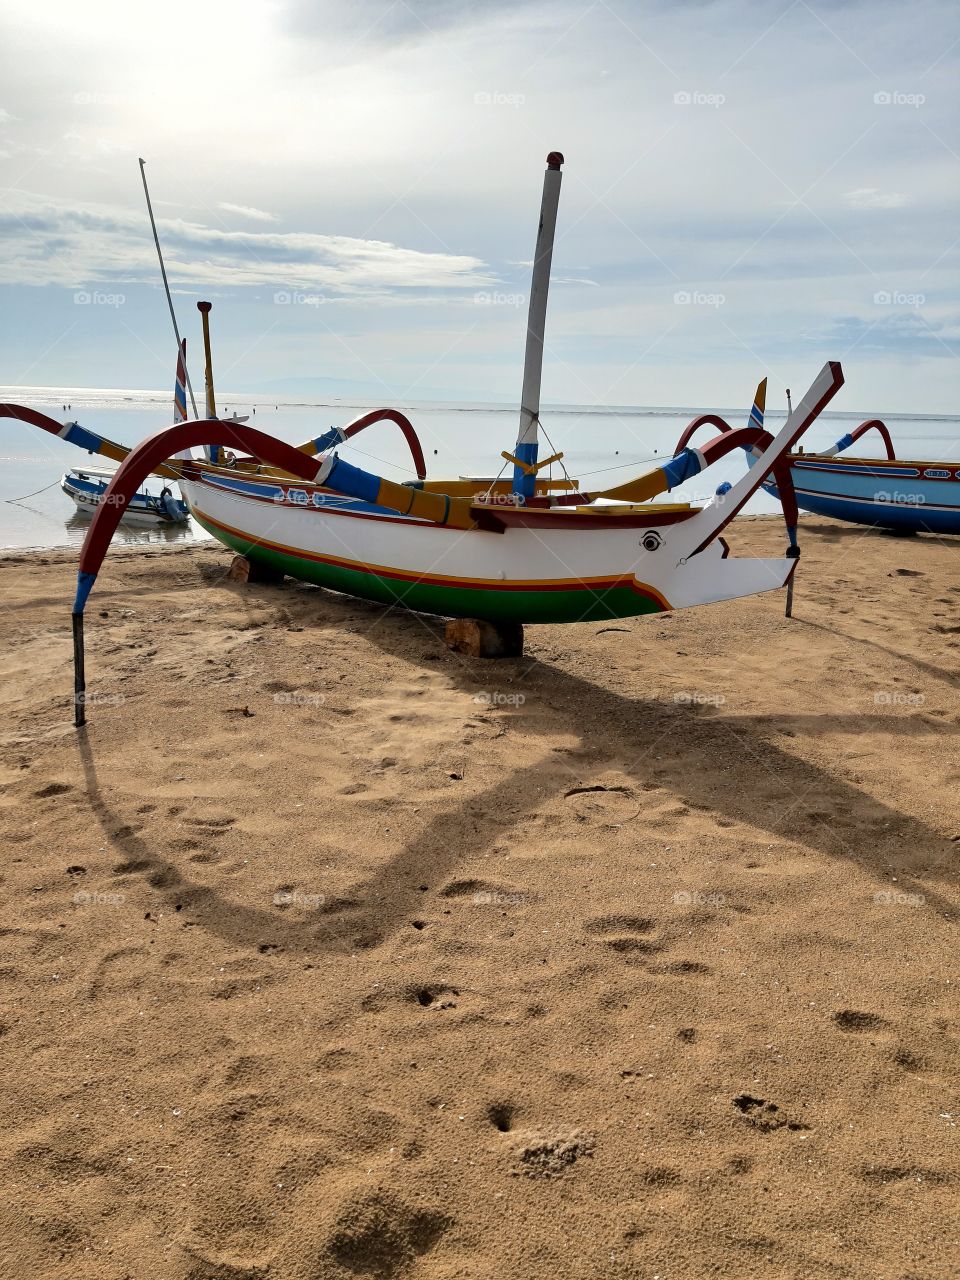 A fishing boat that found in Sanur Beach that located in Bali. This fishing boat was made of a strong big wood and painted with full of colors